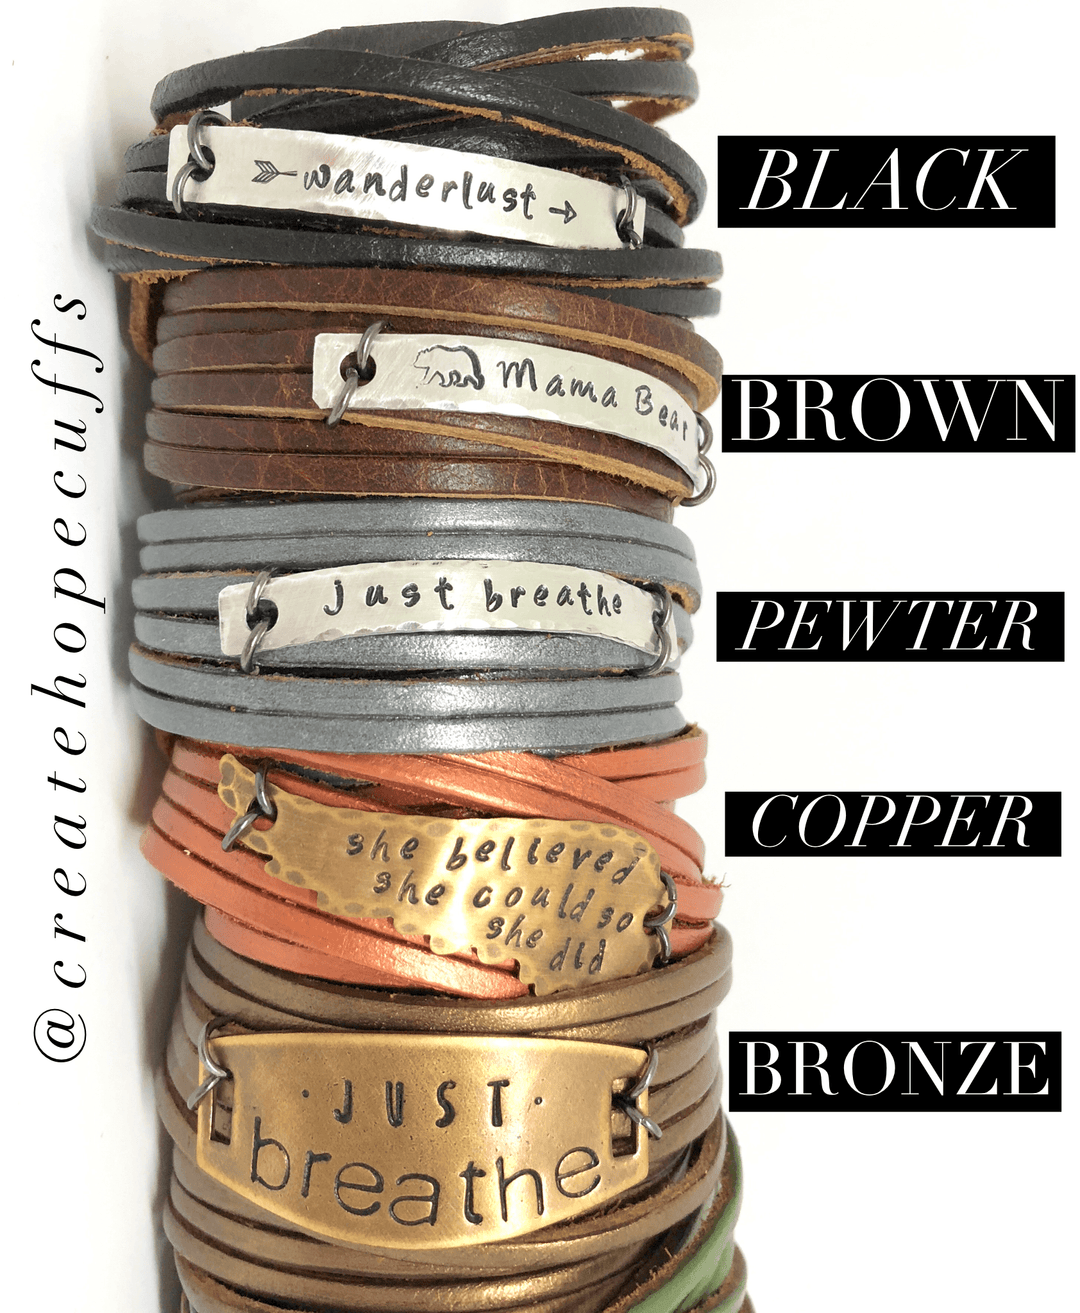 Best Seller! 'God is Greater' Leather Wrap, Silver Bar Bracelet, adjustable Leather Wrap Create Hope Cuffs 